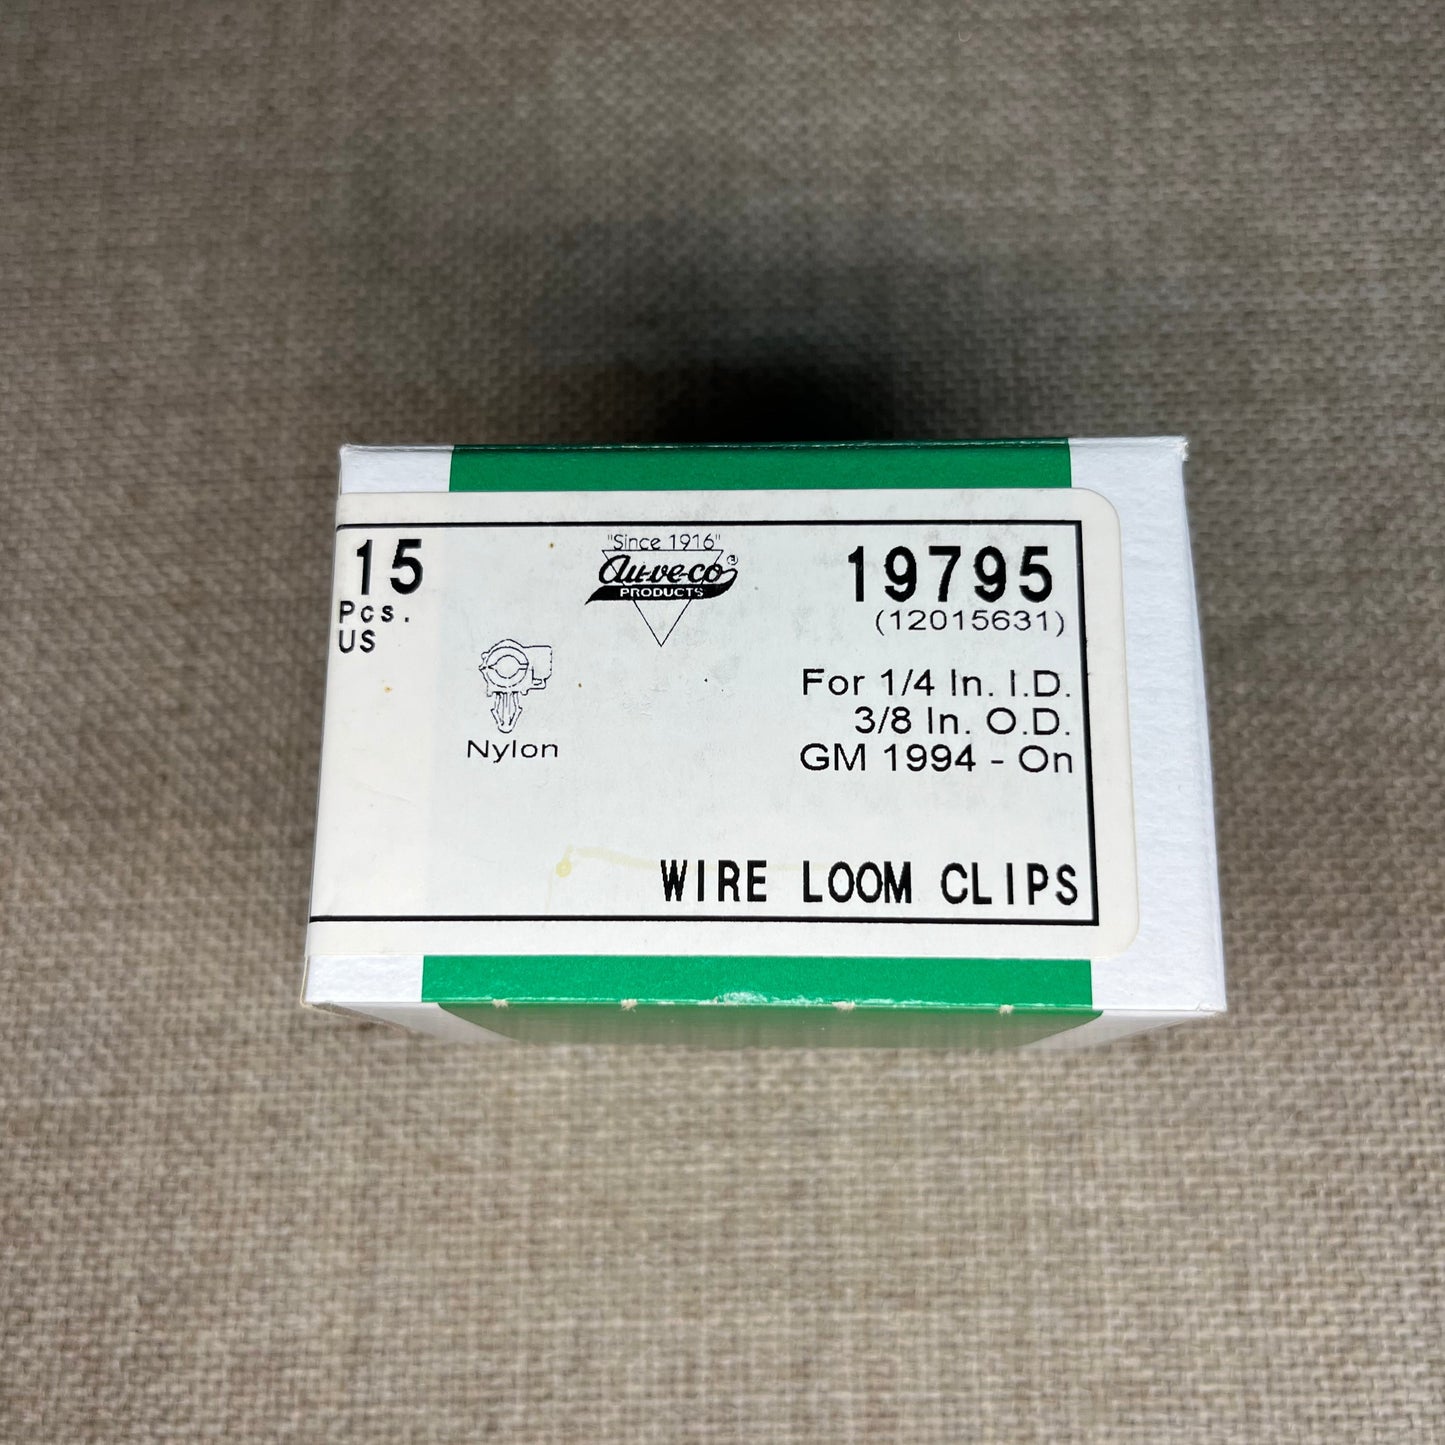 15 Auveco 19795 Wire Loom Routing Clips 1/4" I.D. 3/8" O.D. For GMM 12015631